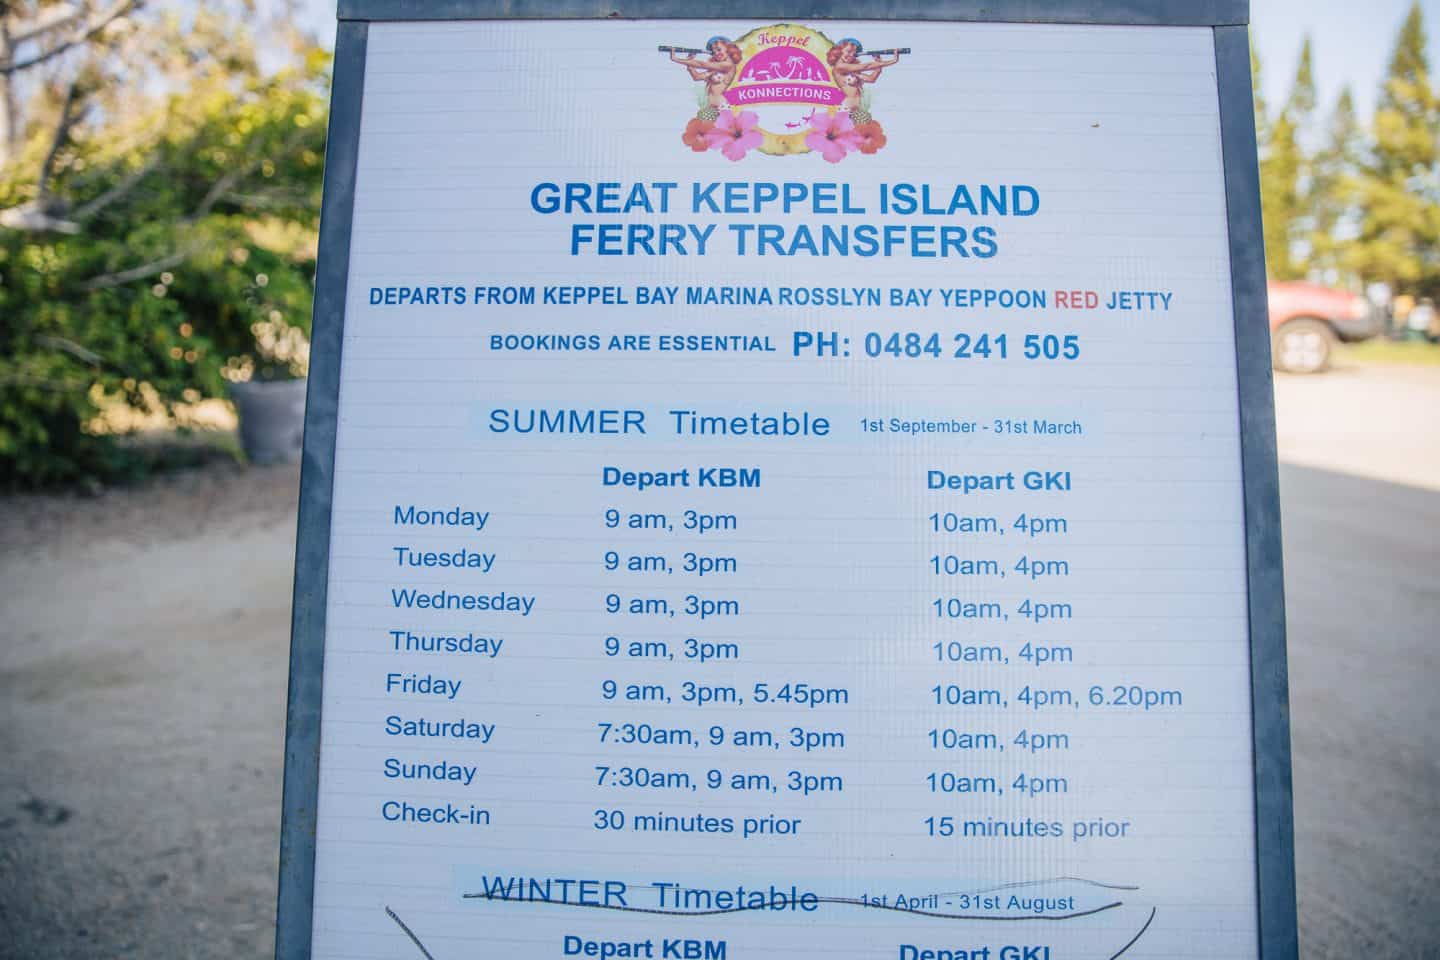 great keppel island, keppel island, things to do in great keppel island, great keppel island ferry, ferry to great Keppel island, great Keppel island ferries